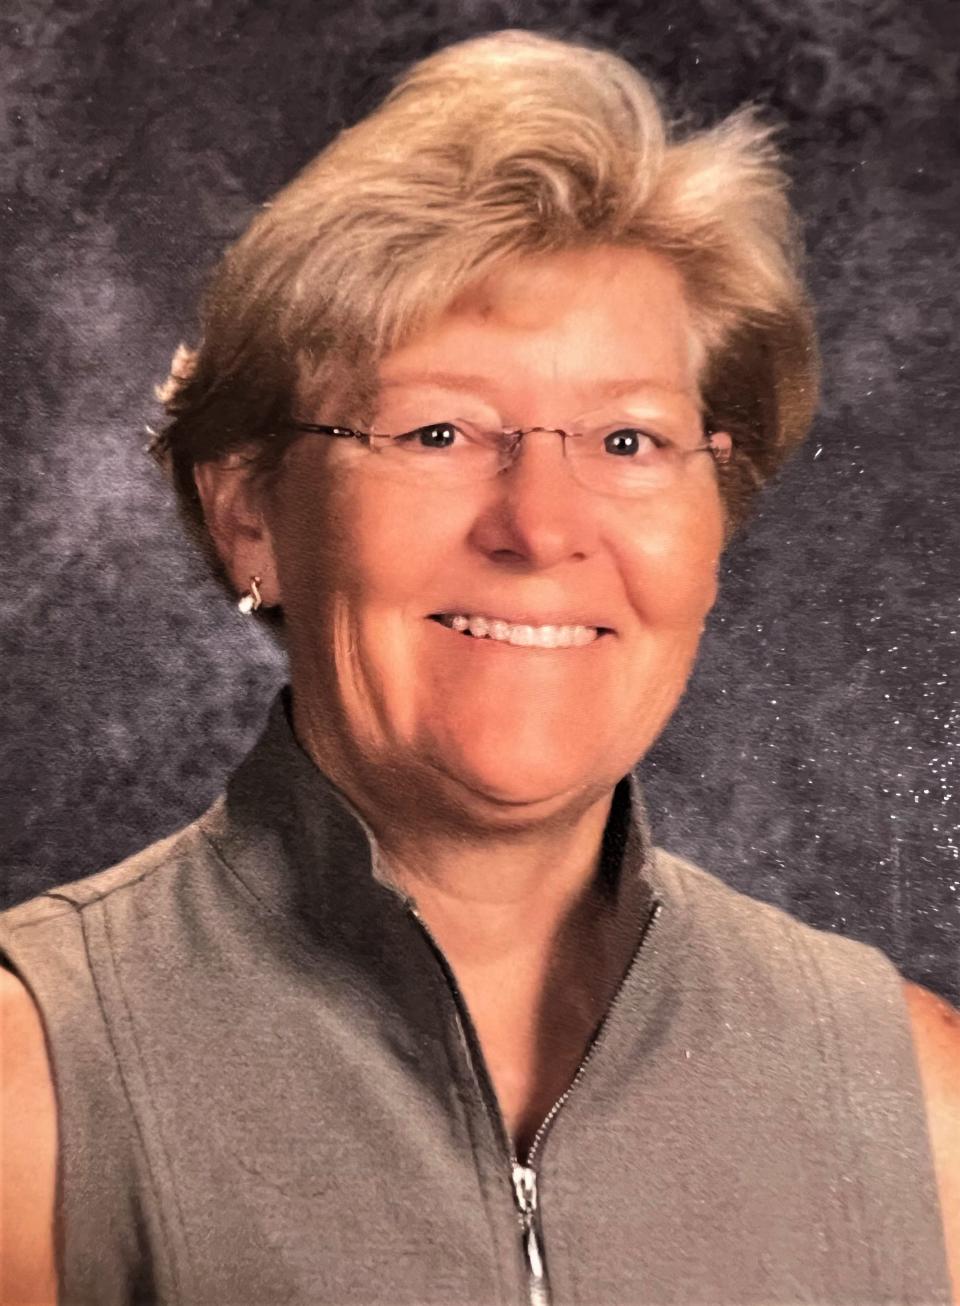 Cowan athletic director Suzanne Crump announced her retirement after the 2022-23 school year.